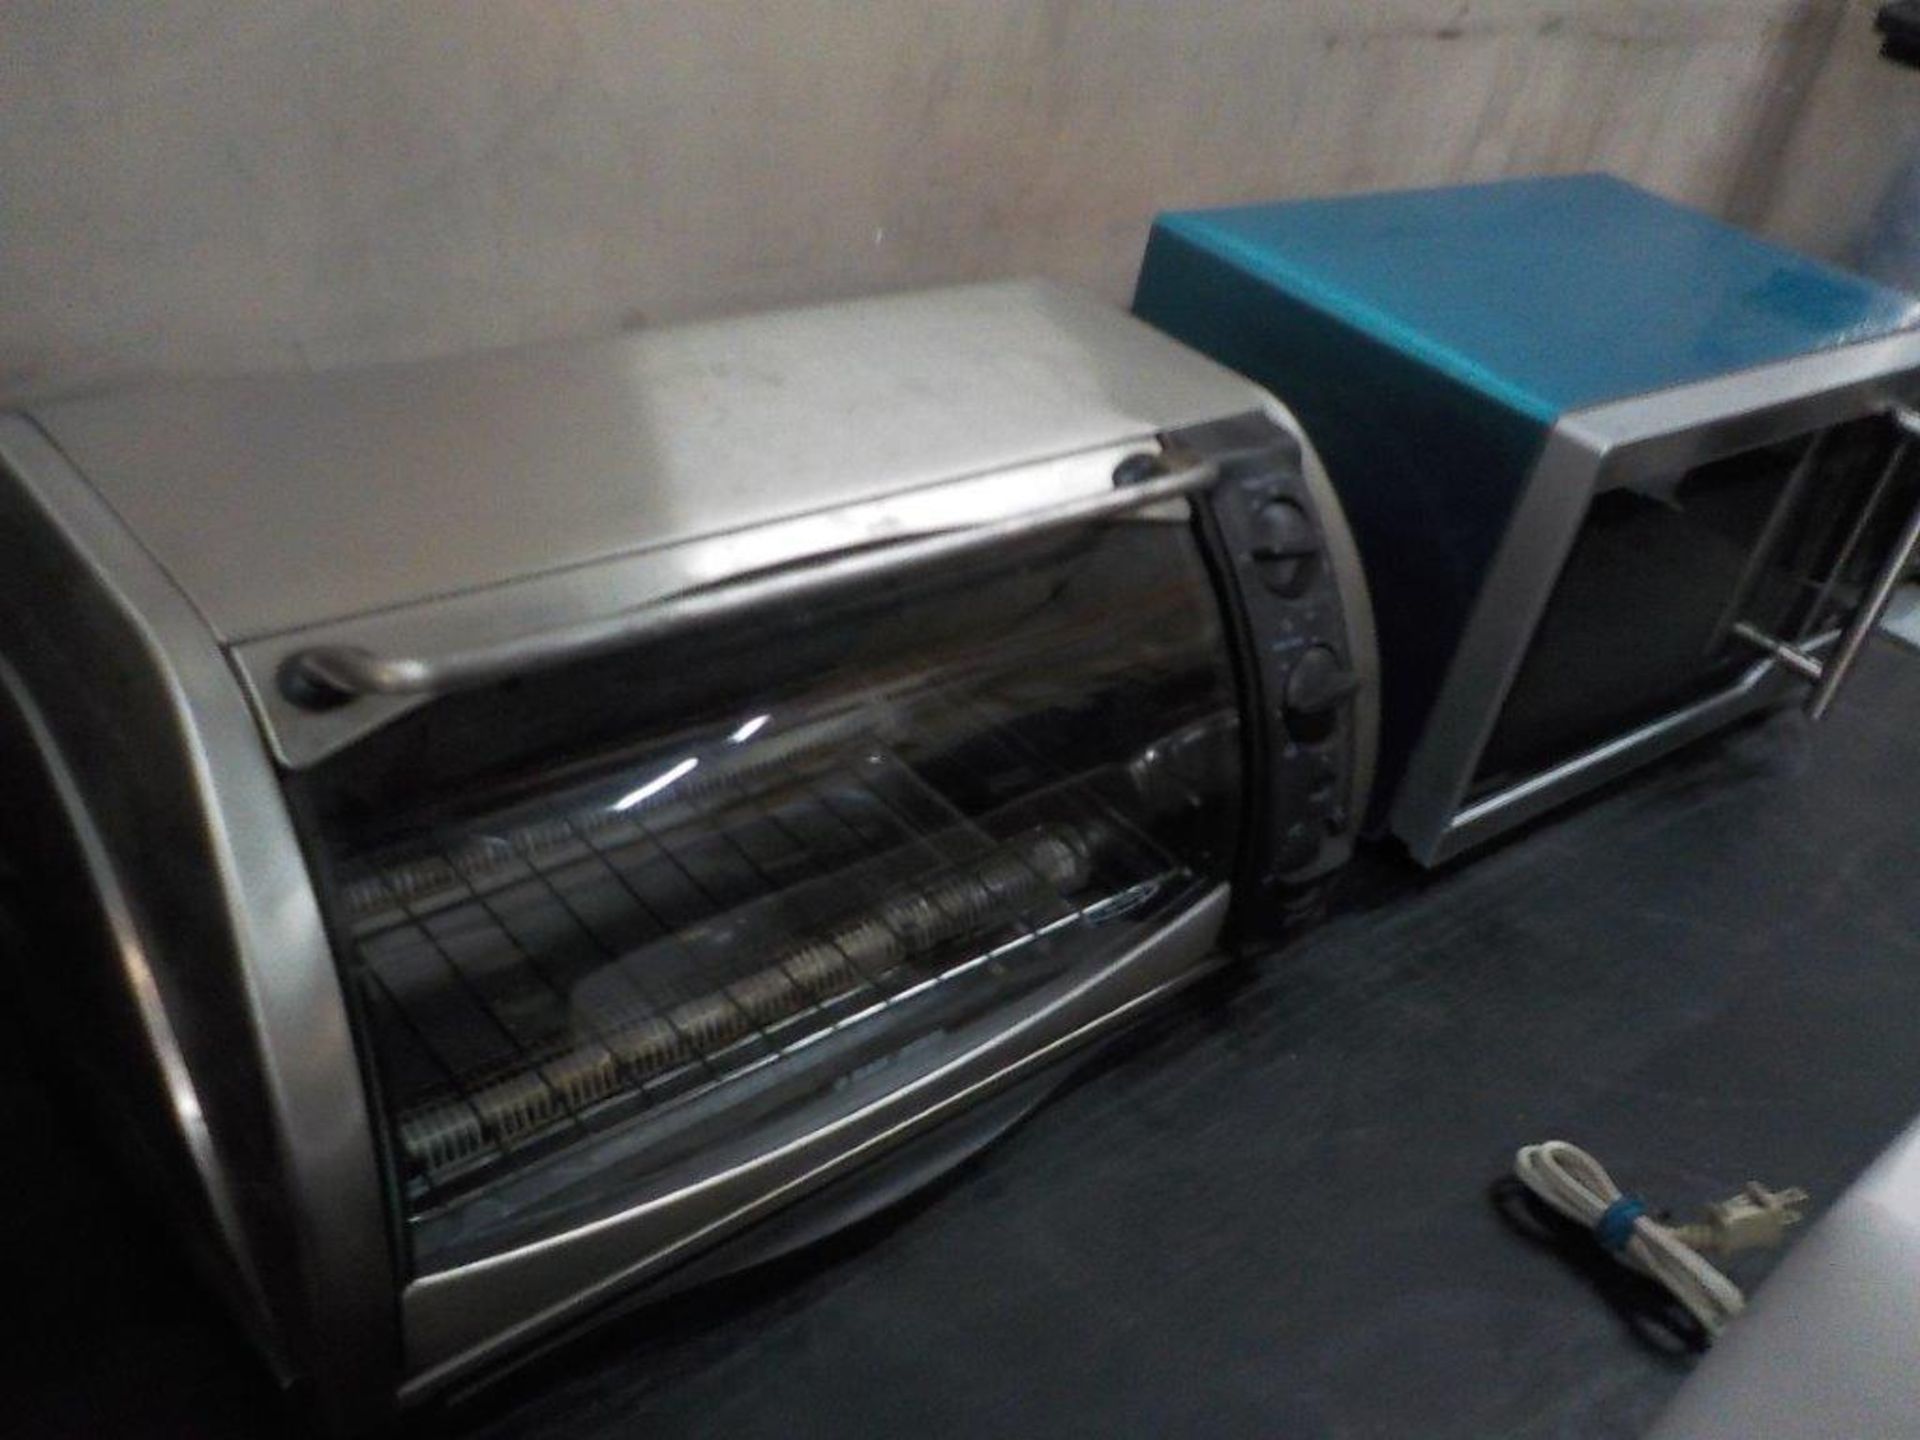 'DANBY'' MICROWAVE & '' B&D'' TOASTER OVEN - Image 2 of 2